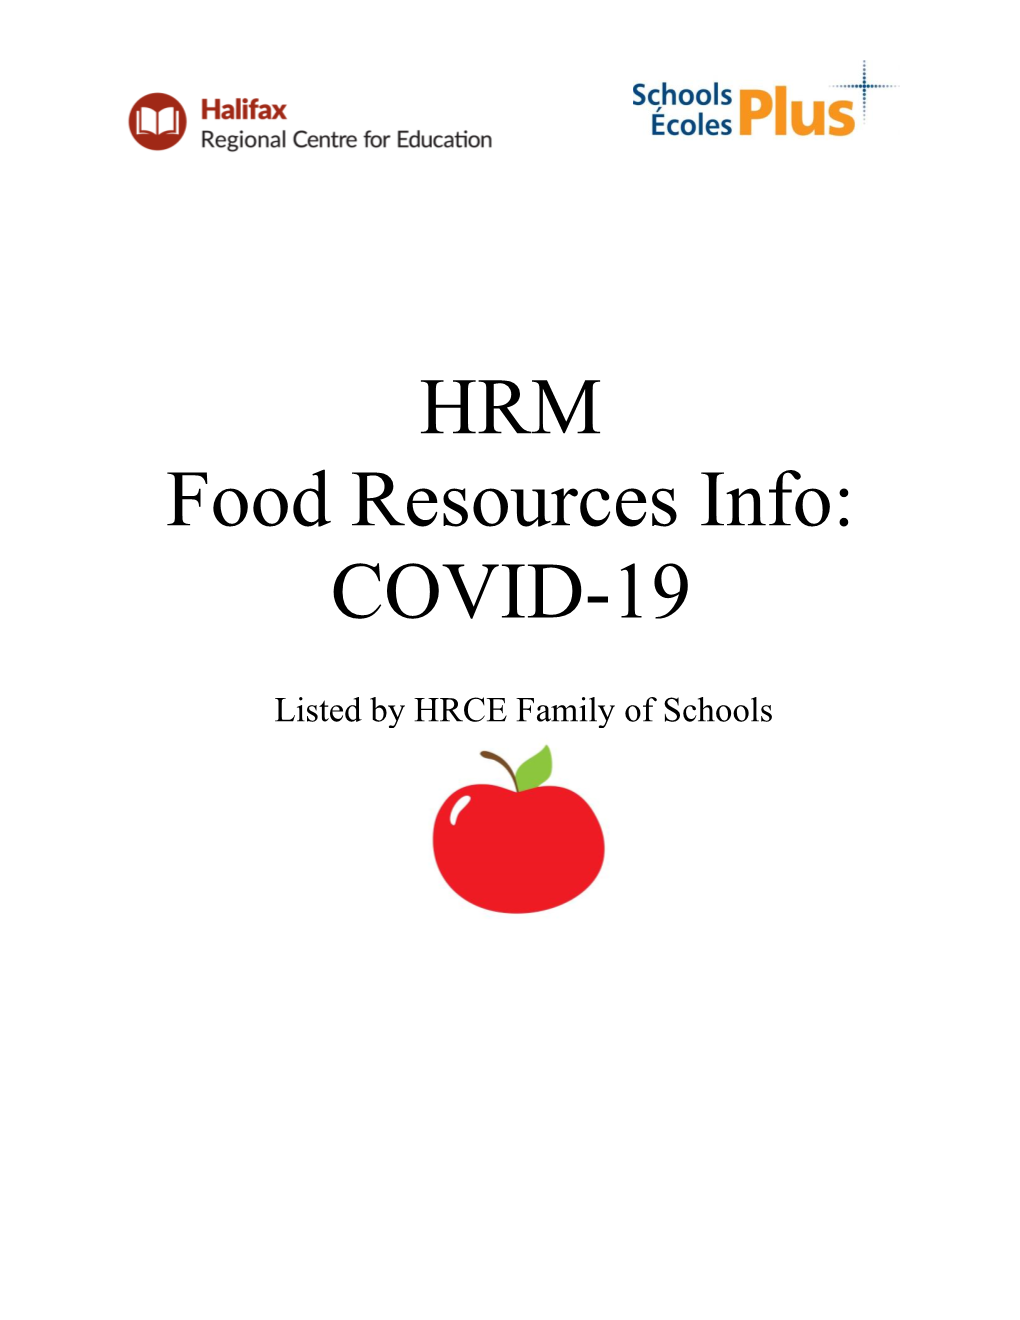 HRM Food Resources Info: COVID-19